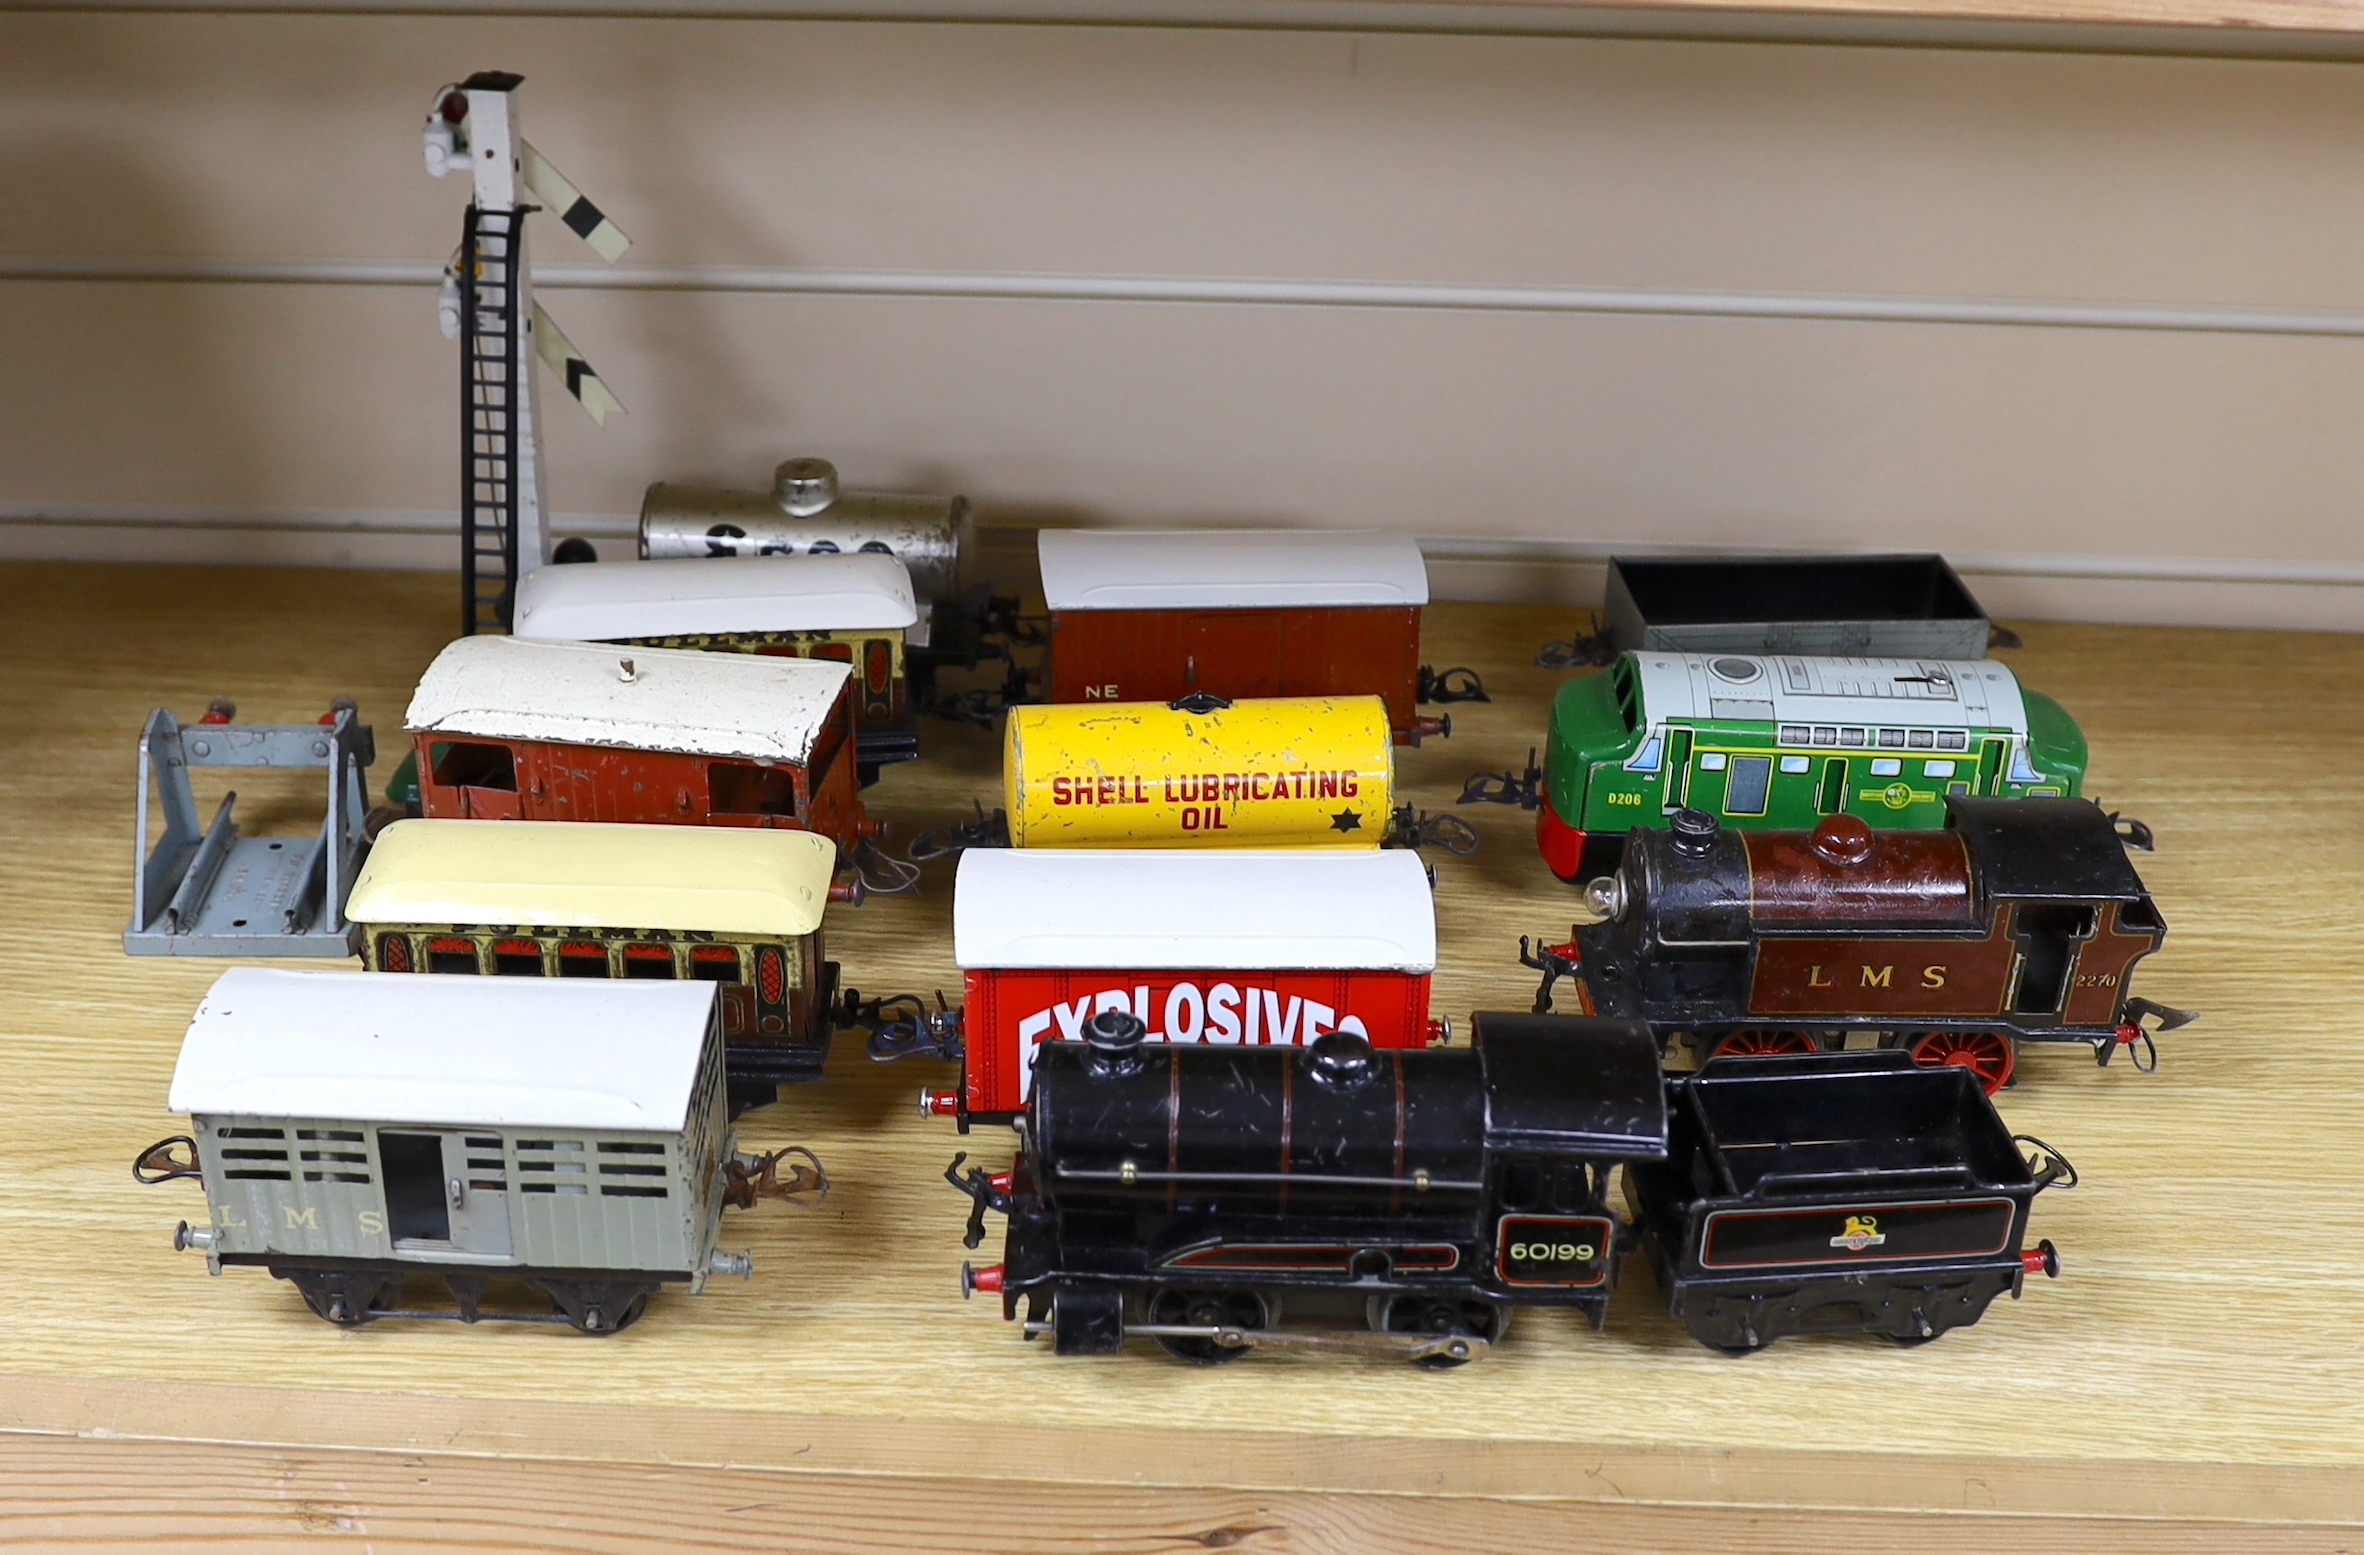 Thirteen Hornby 0 gauge tinplate items including; a clockwork 0-4-0 tender loco, 60199, a 20v electric 0-4-0T loco, 2270, an electric 0-4-0 diesel loco by another maker, marked Made in Great Britain, together with seven 